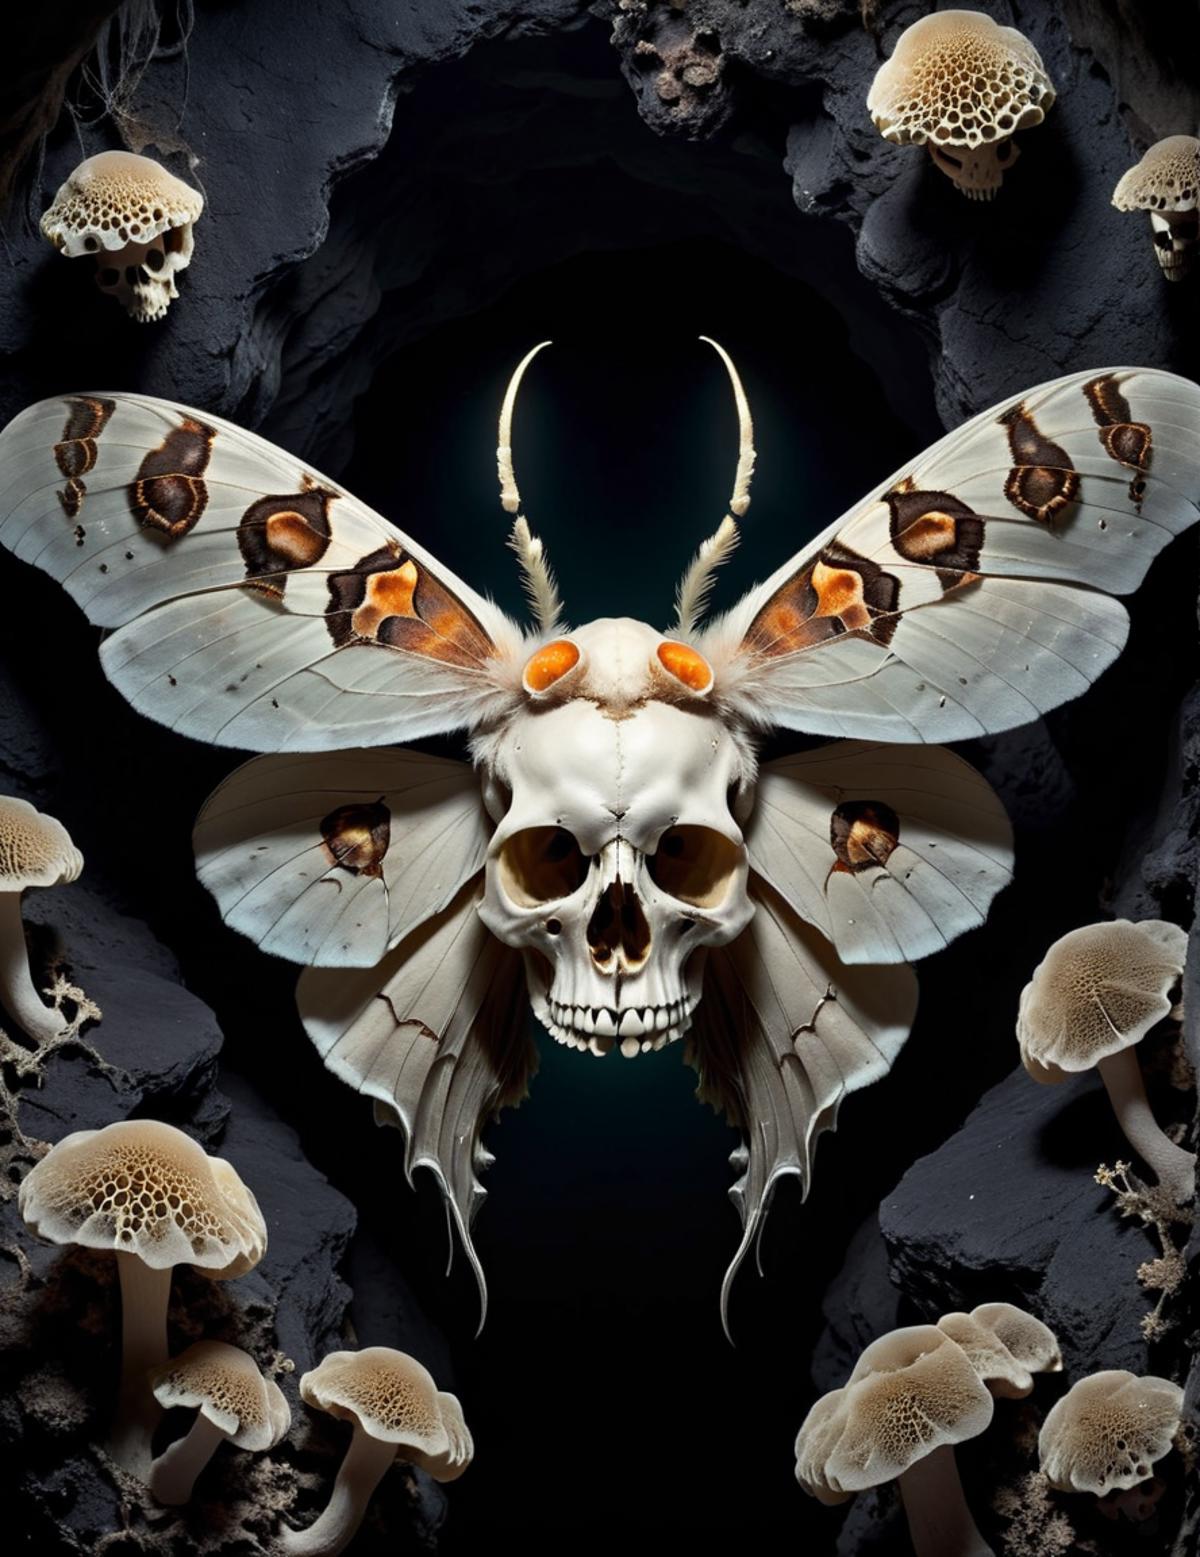 A skull with horns, surrounded by mushrooms and other insects.